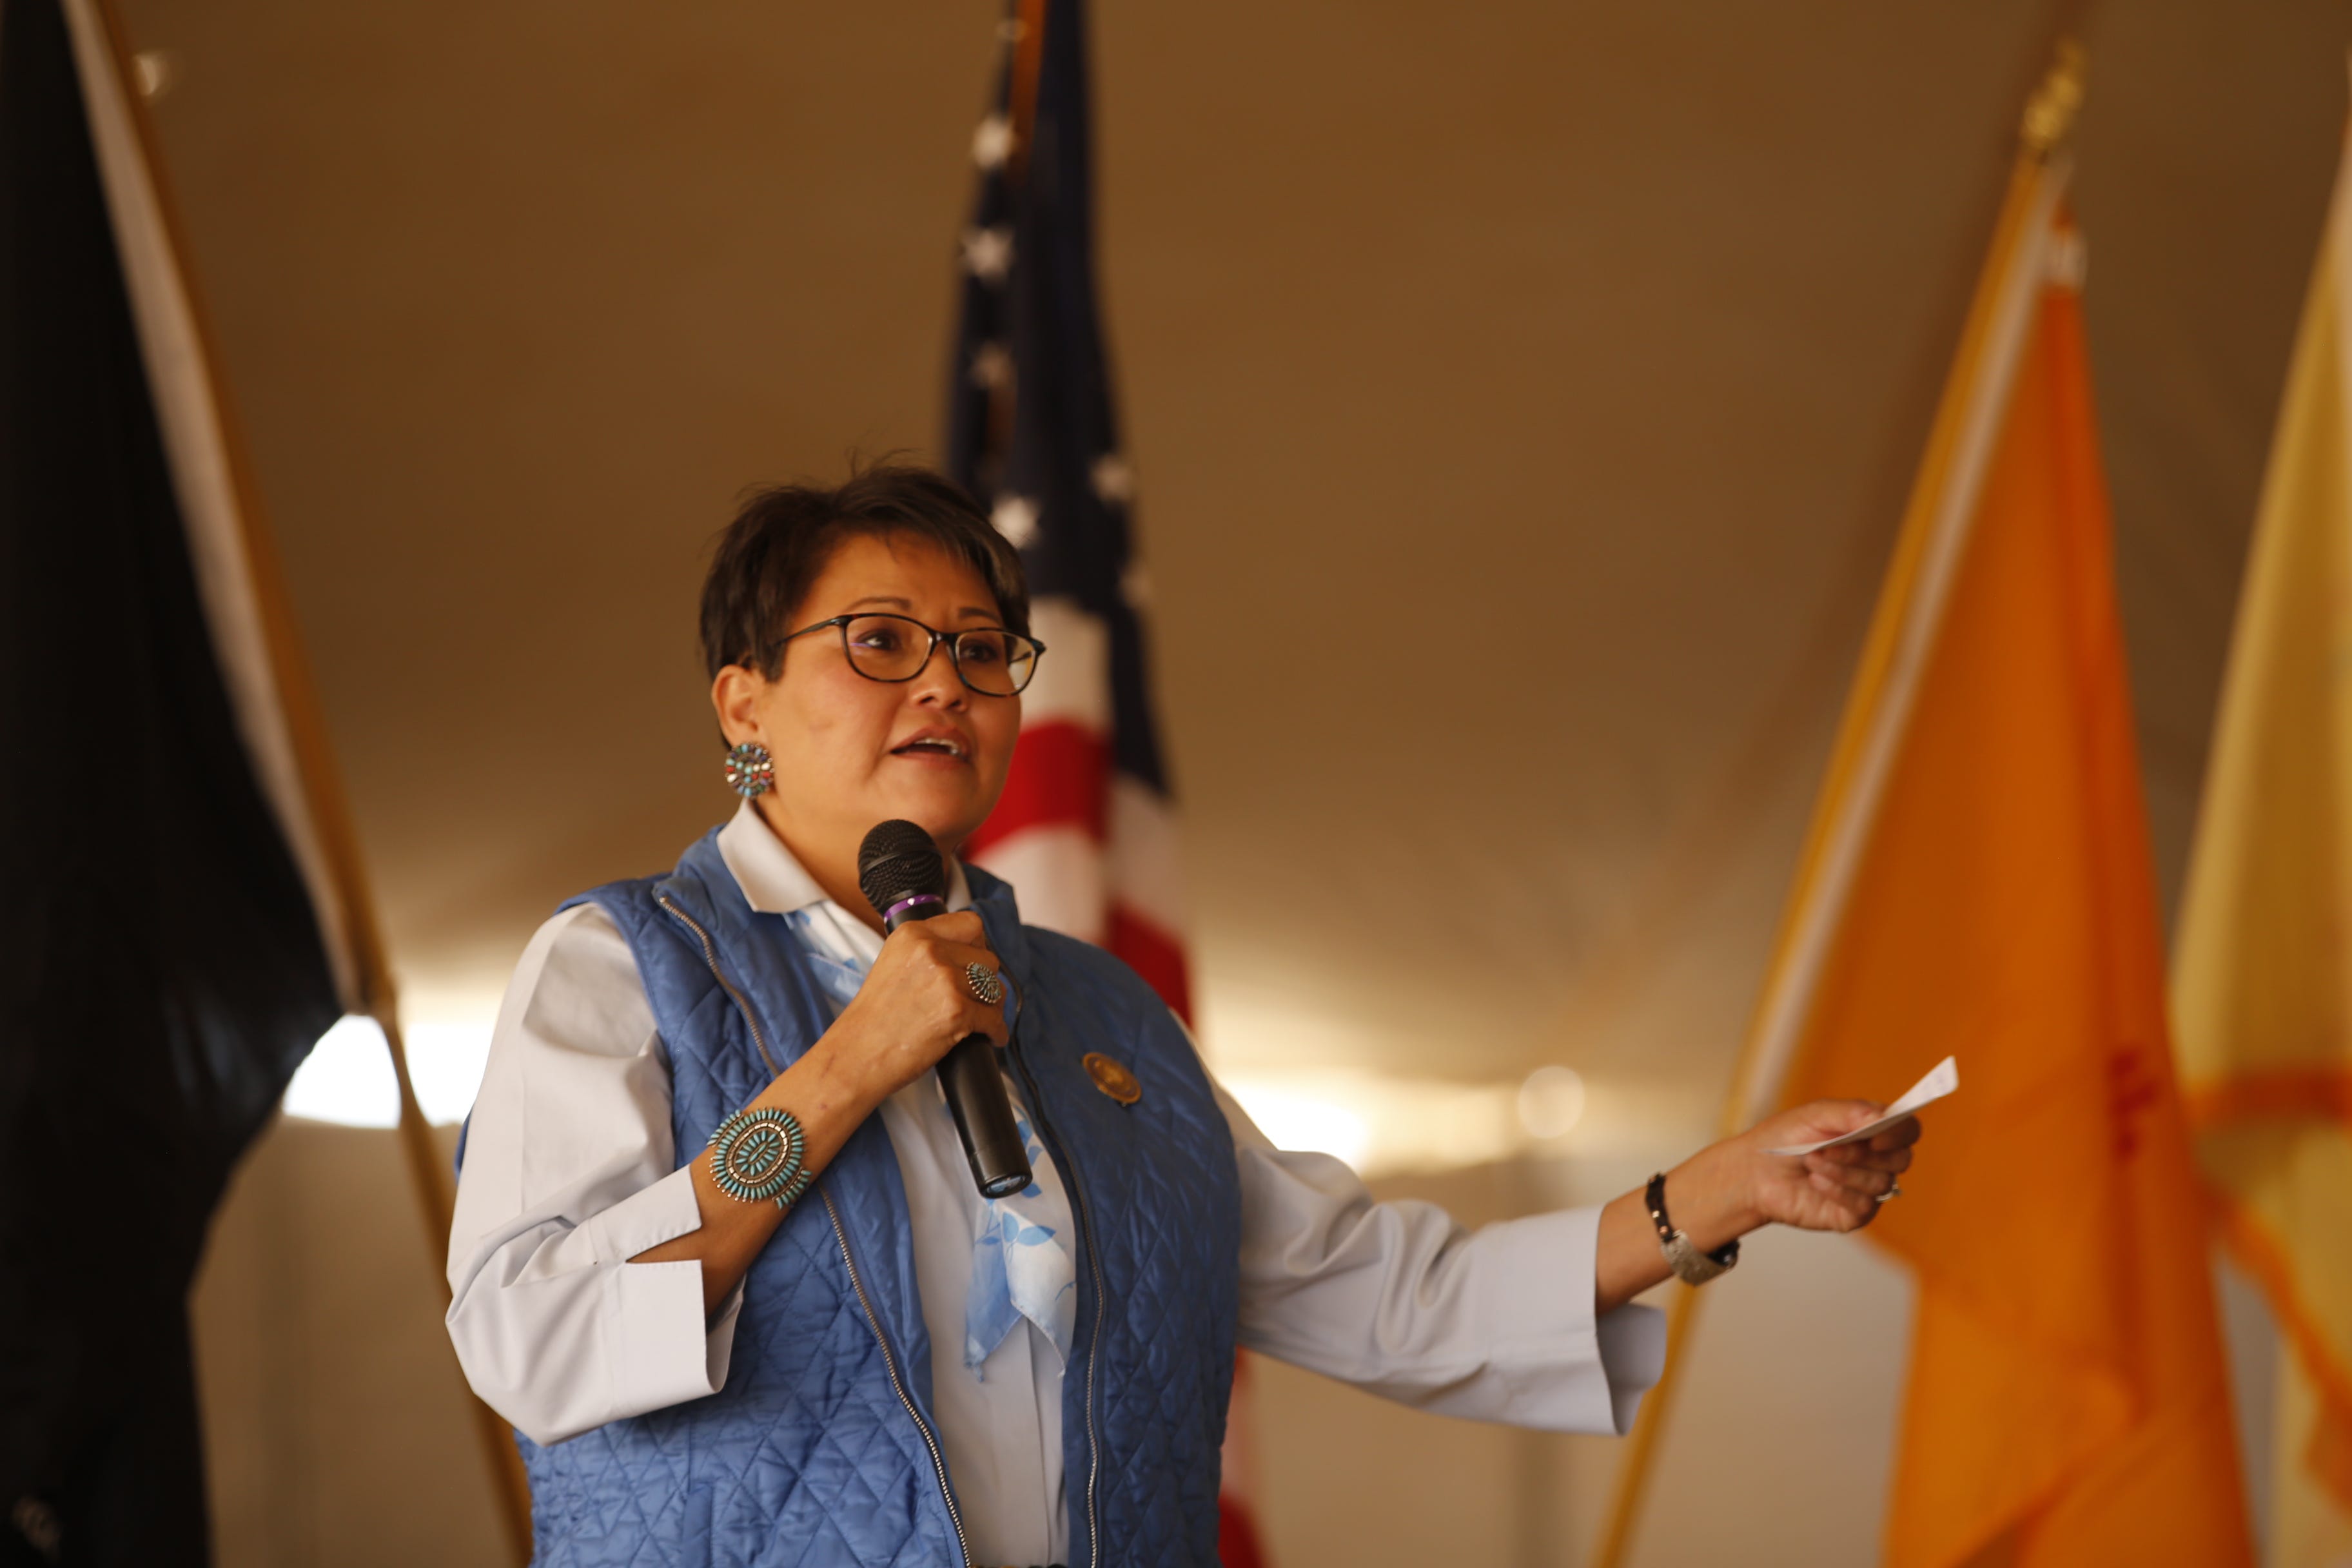 Navajo Nation Council Delegate Eugenia Charles-Newton, who sponsored legislation opposing the closure of VA clinics proposed by the Veteran's Administration,  is seen speaking on April 2 at the 2022 National Vietnam War Veterans Day event in Shiprock.